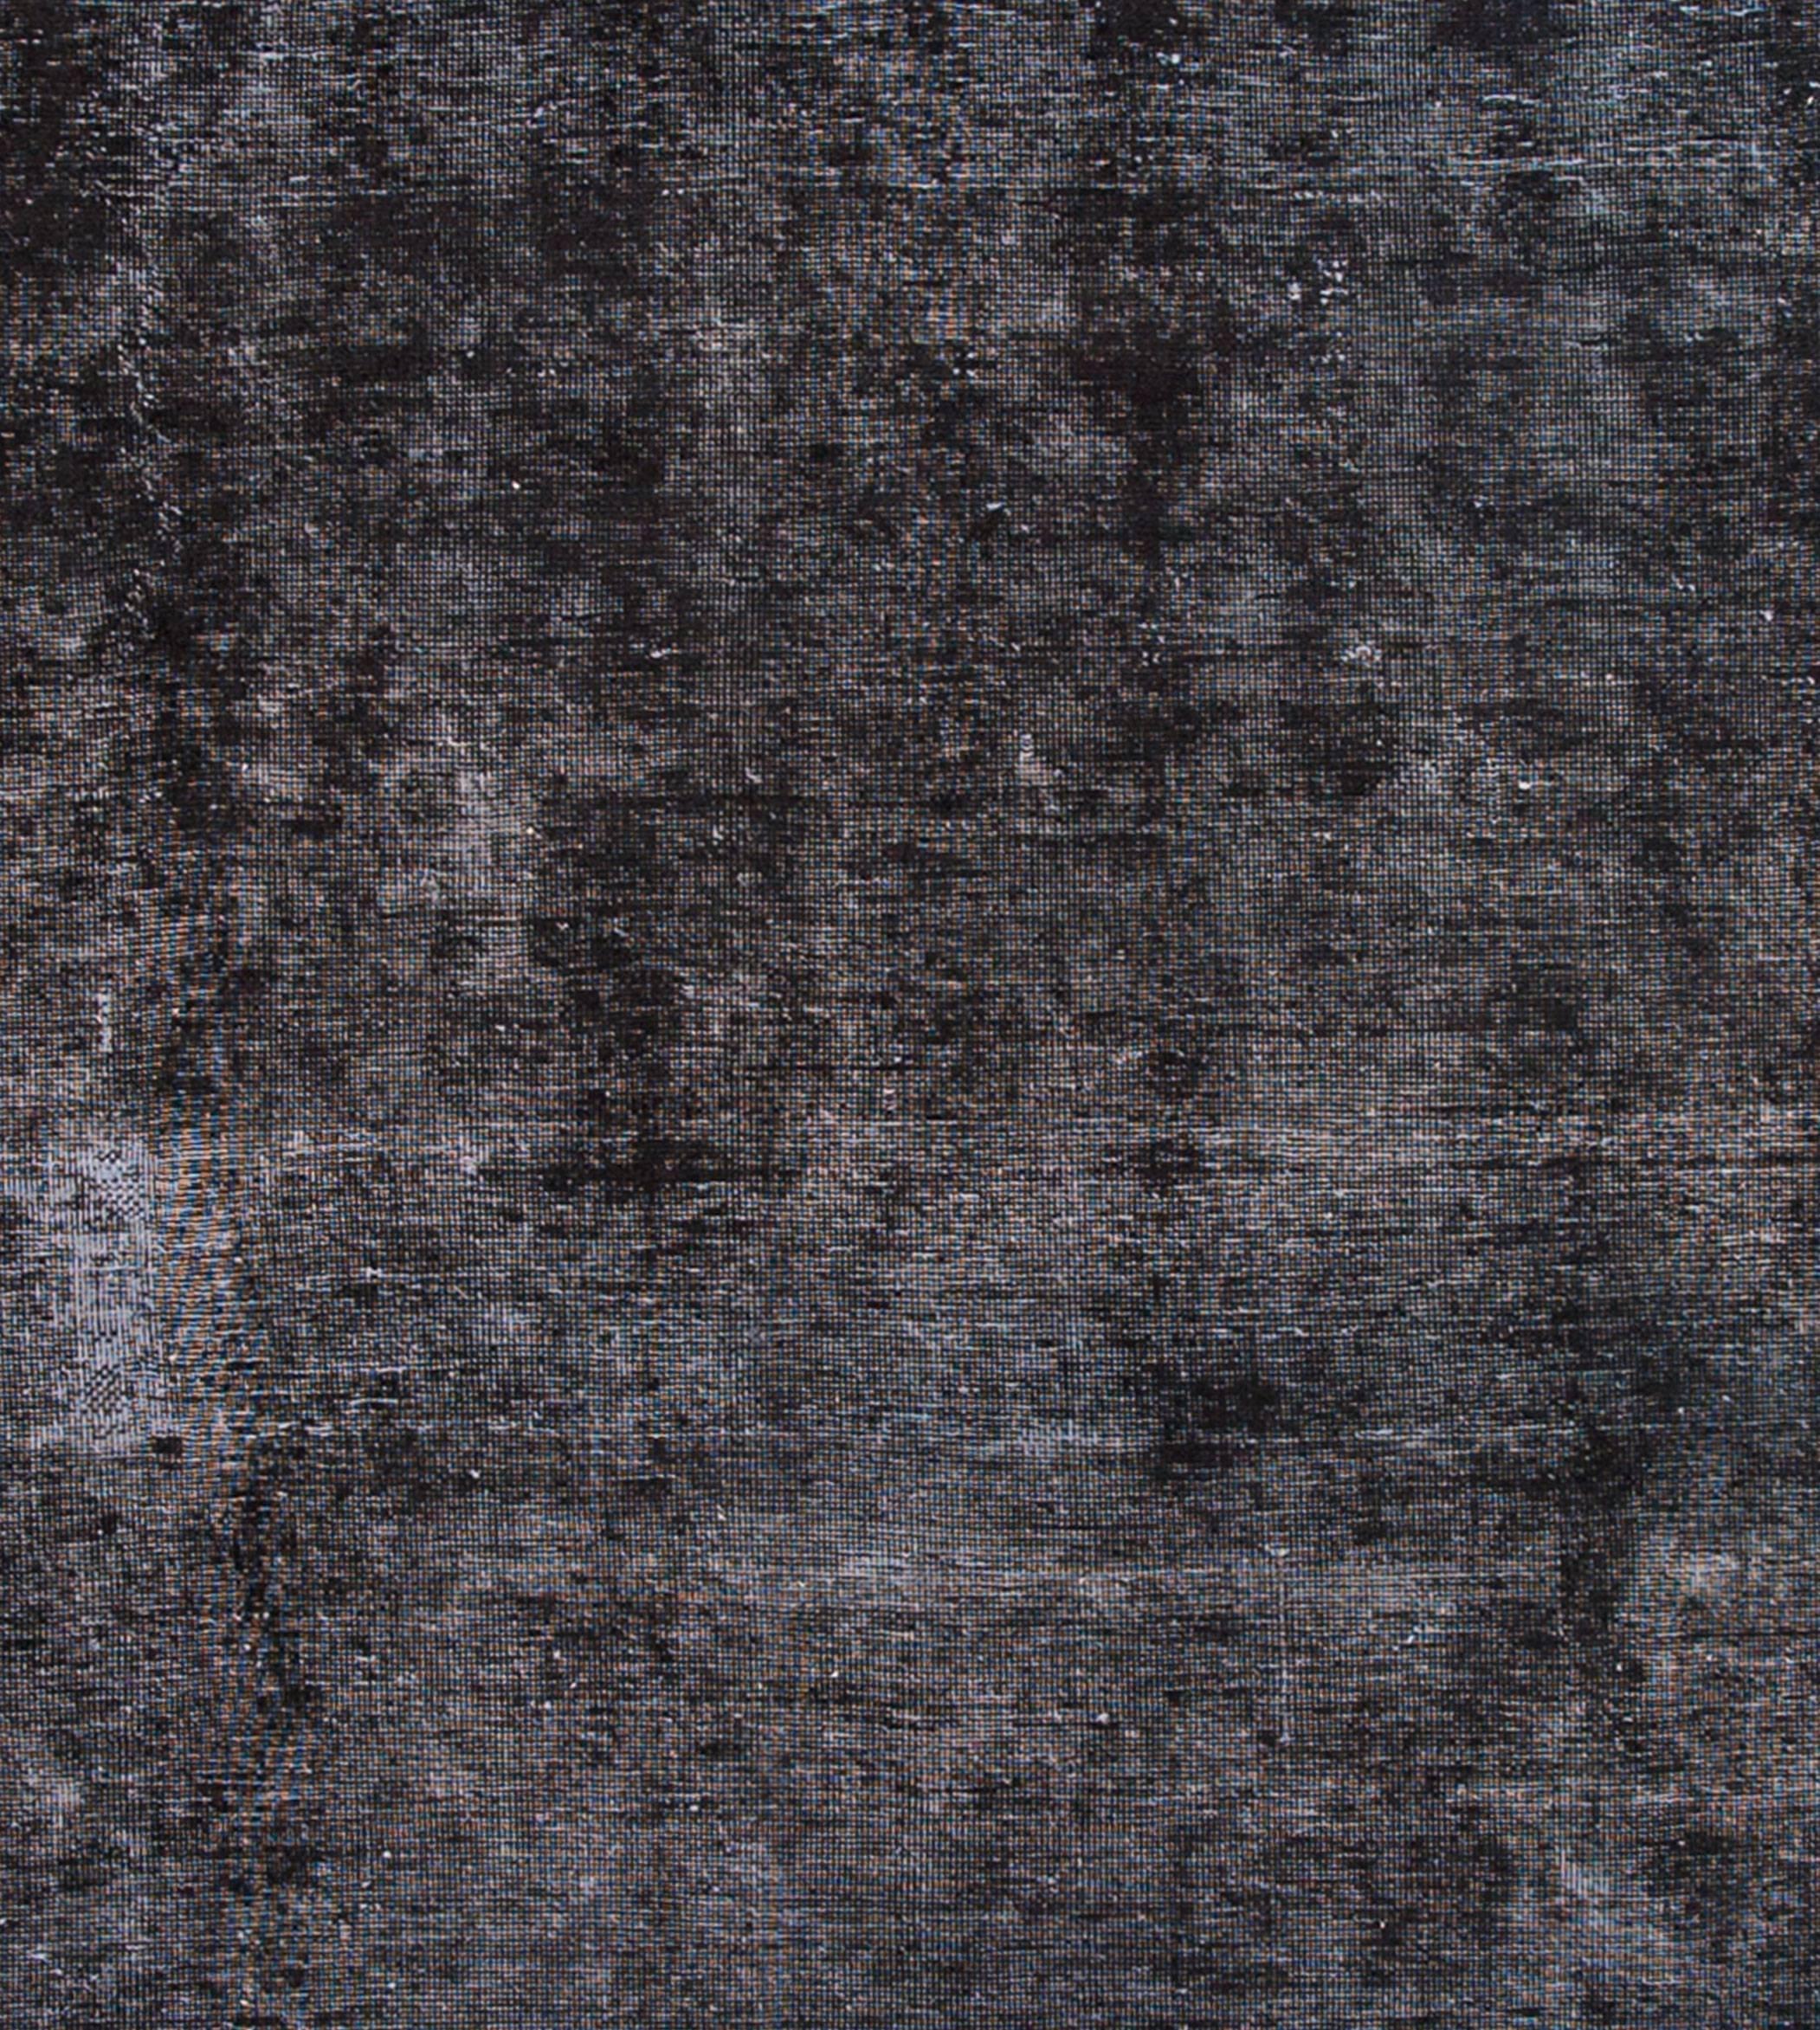 Persian Vintage Blue/Gray Distressed Overdyed Carpet